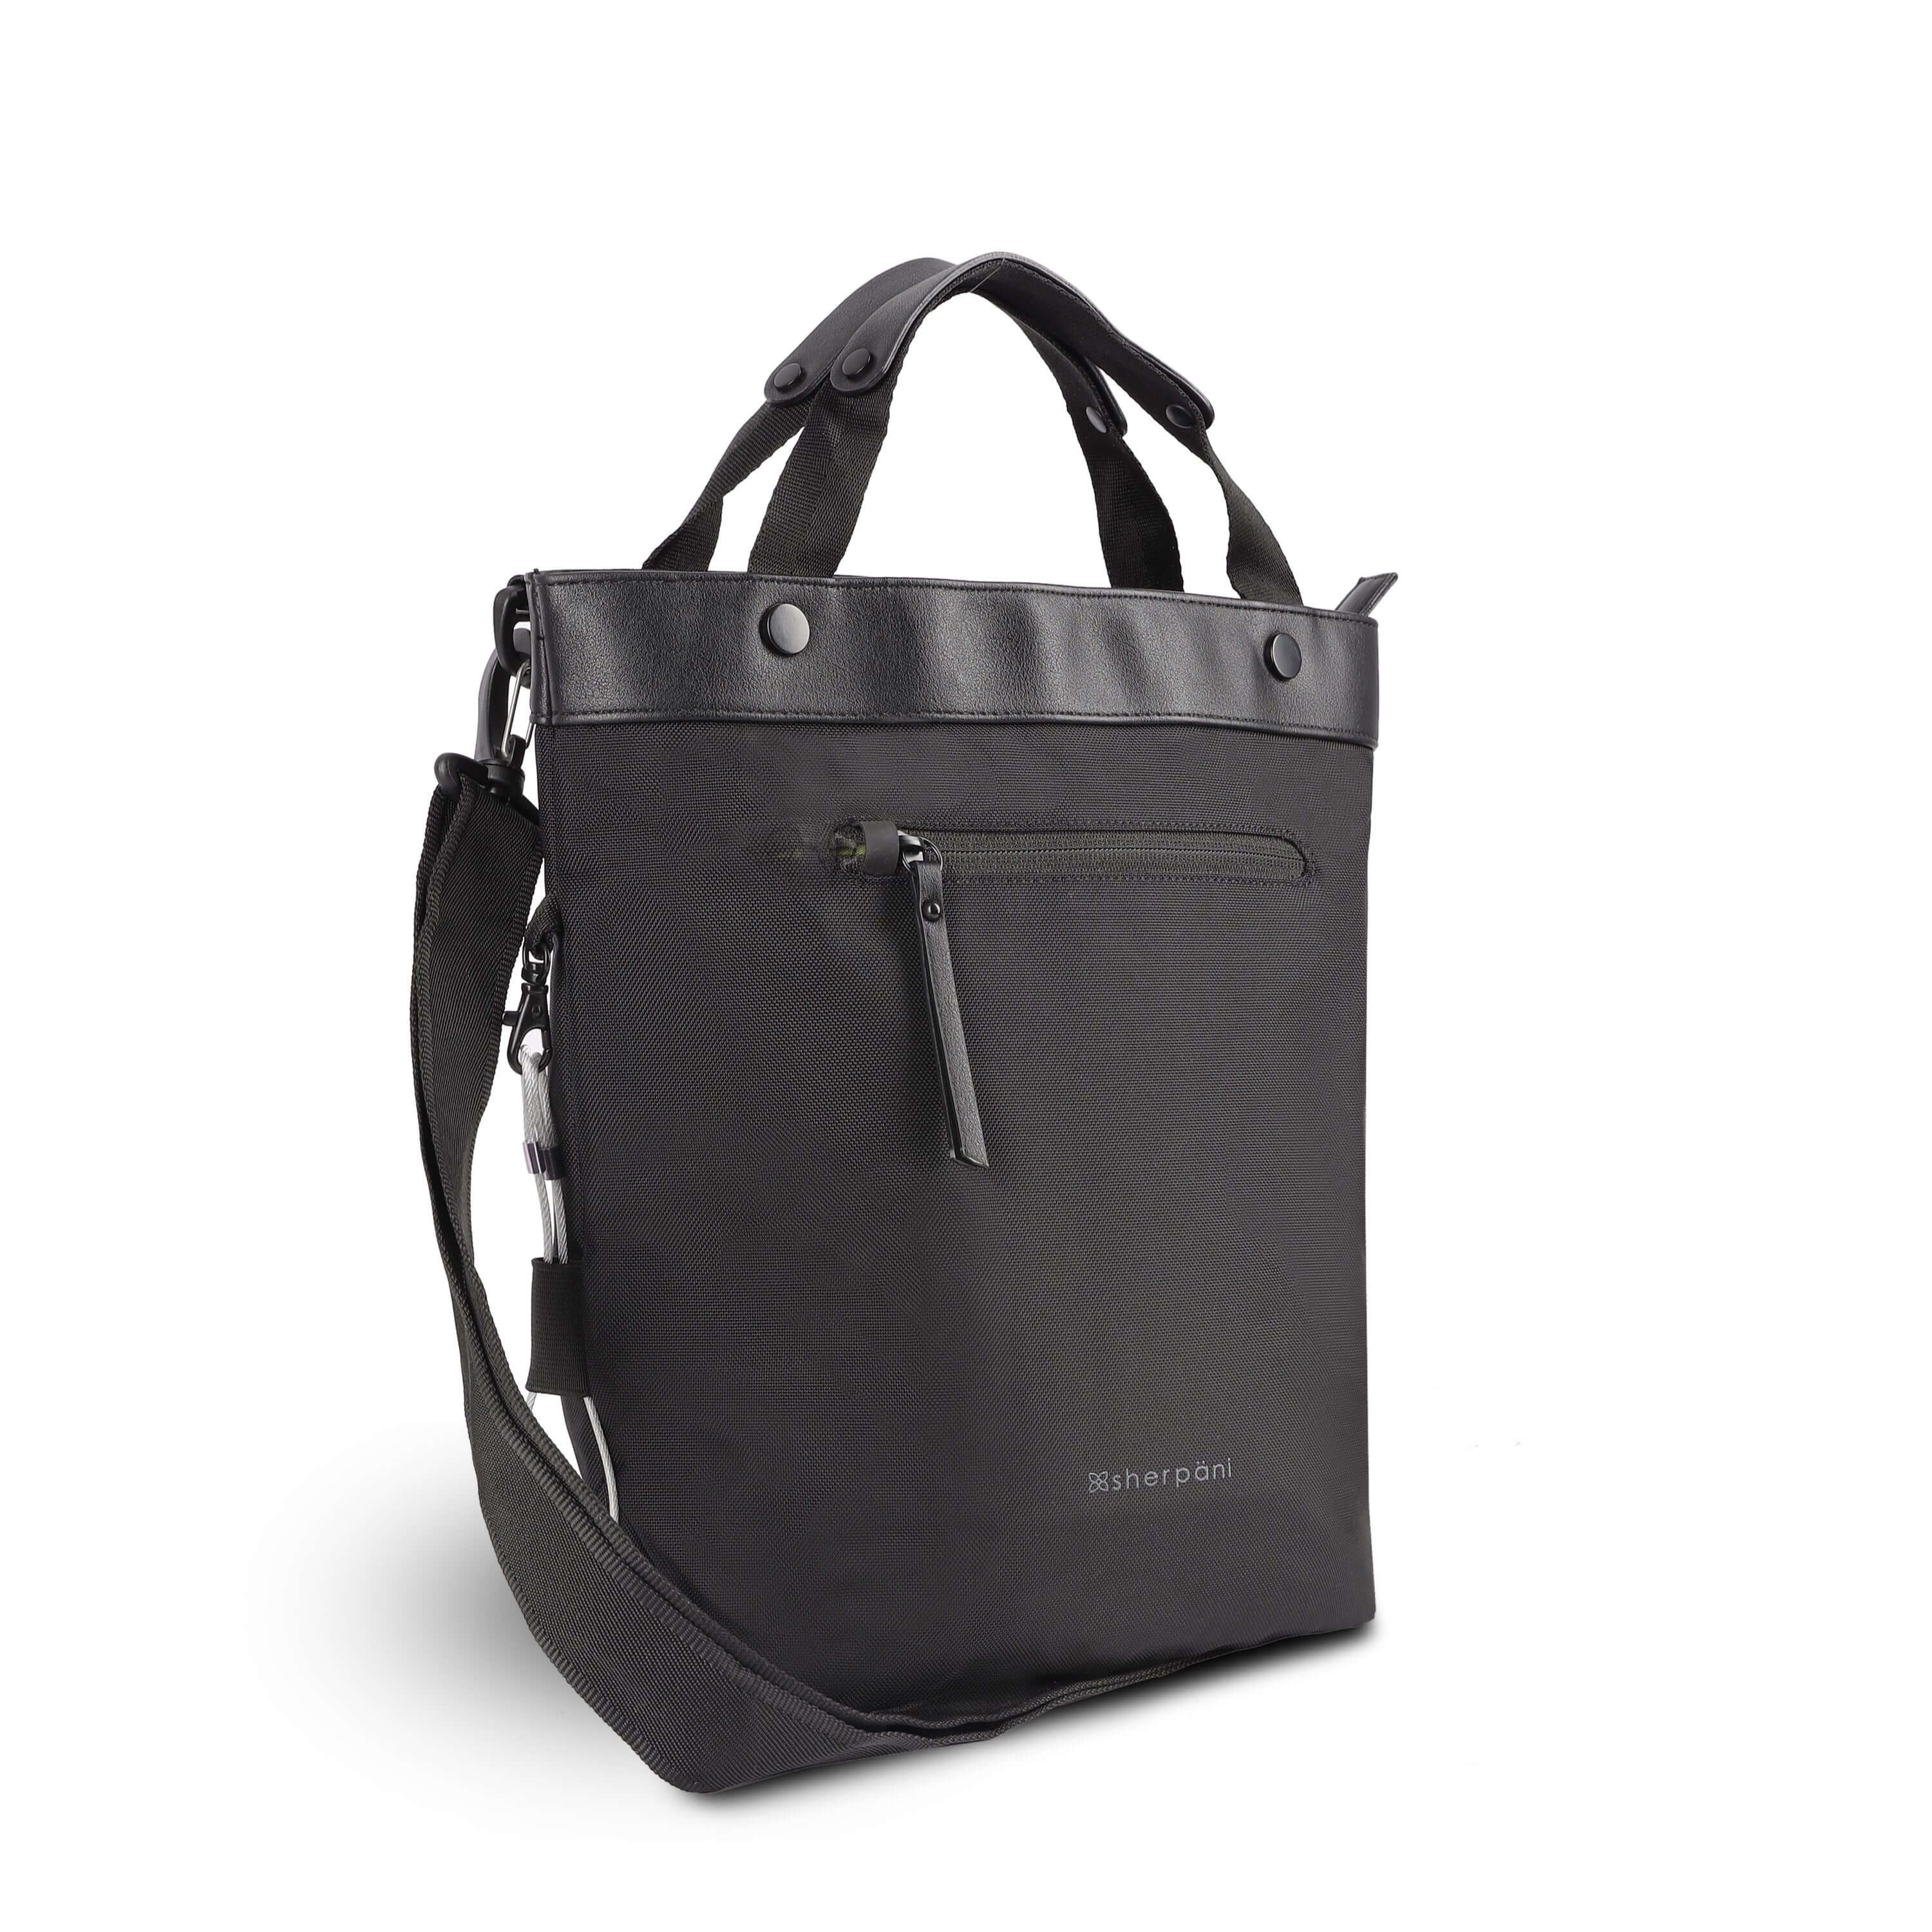 Angled front view of Sherpani&#39;s Anti-Theft bag, the Geo AT in Carbon, with vegan leather accents in black. The bag features short tote handles and an adjustable/detachable crossbody strap. There is a locking zipper compartment on the front. A chair loop lock is clipped to the side and secured in place by an elastic tab.